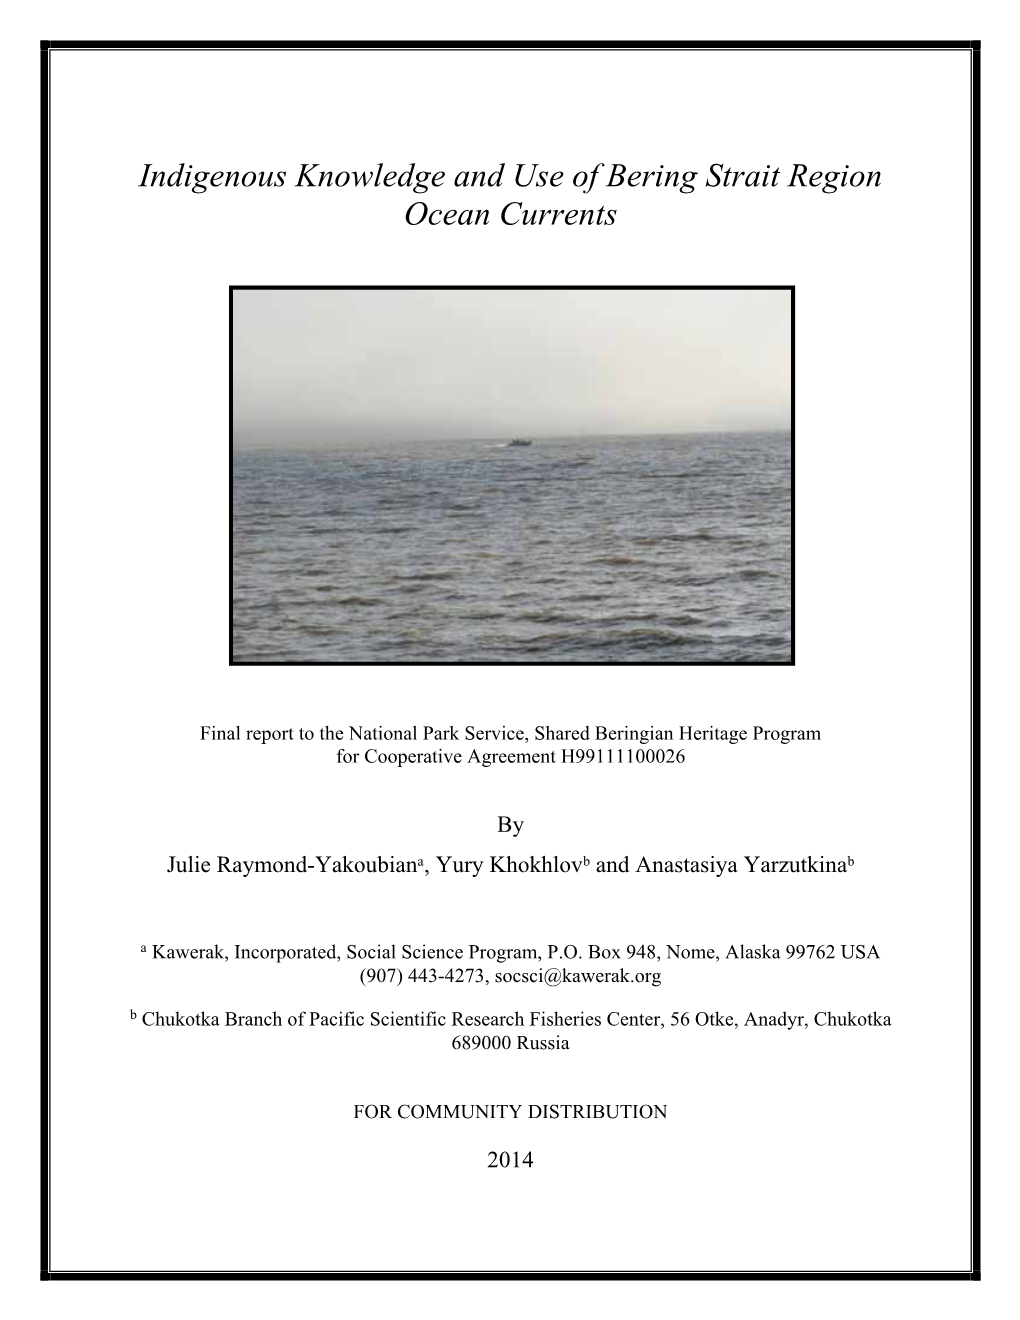 Indigenous Knowledge and Use of Bering Strait Region Ocean Currents